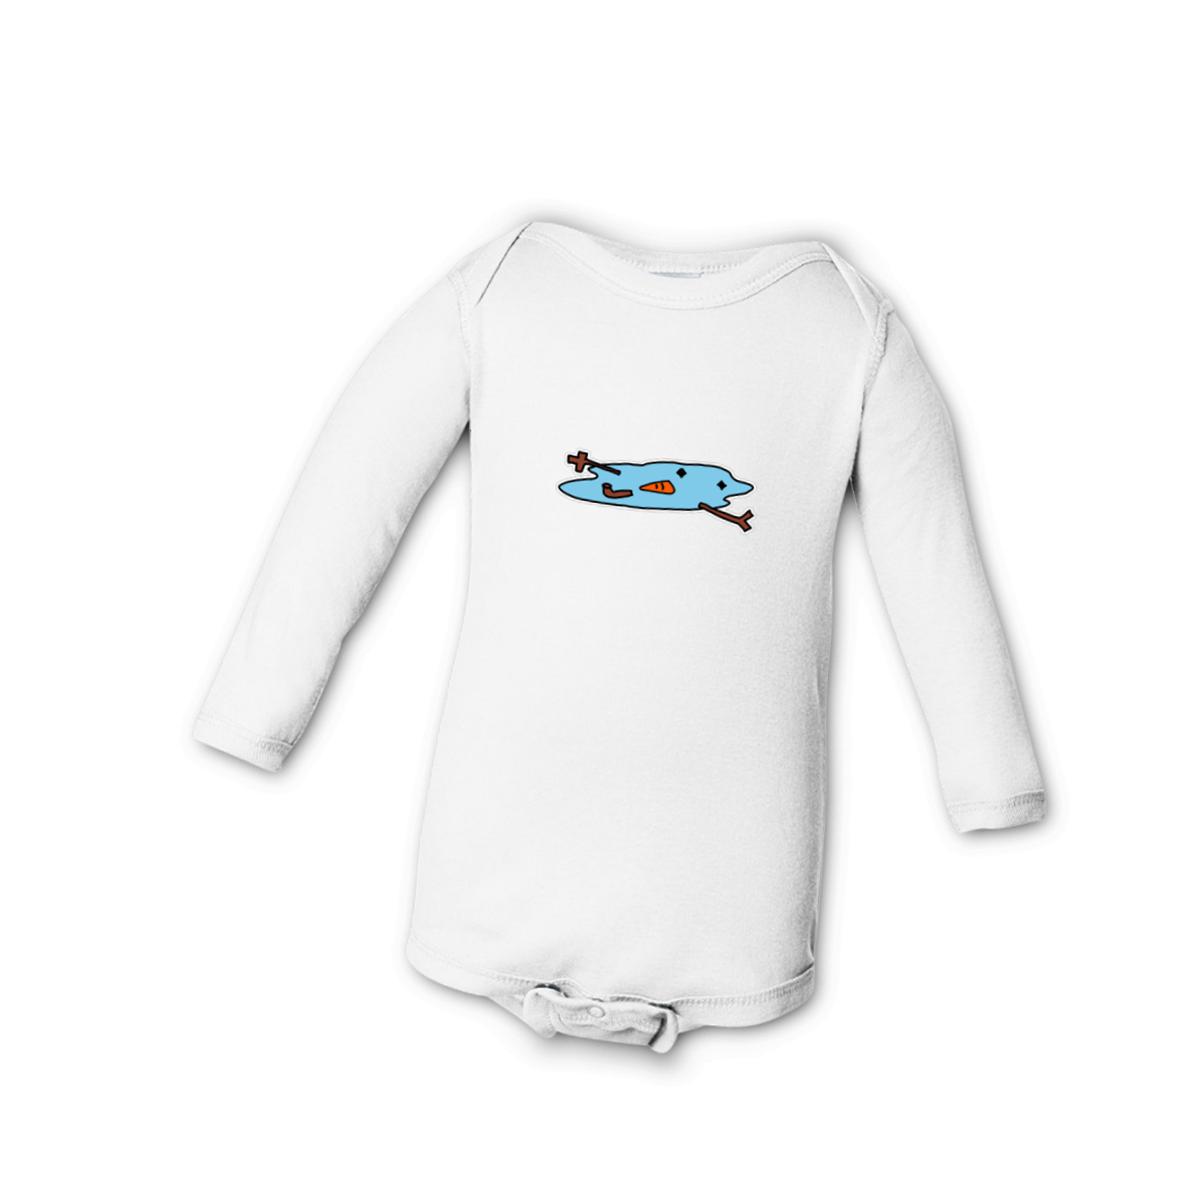 Snowman Puddle Long Sleeve Onesie 12M white